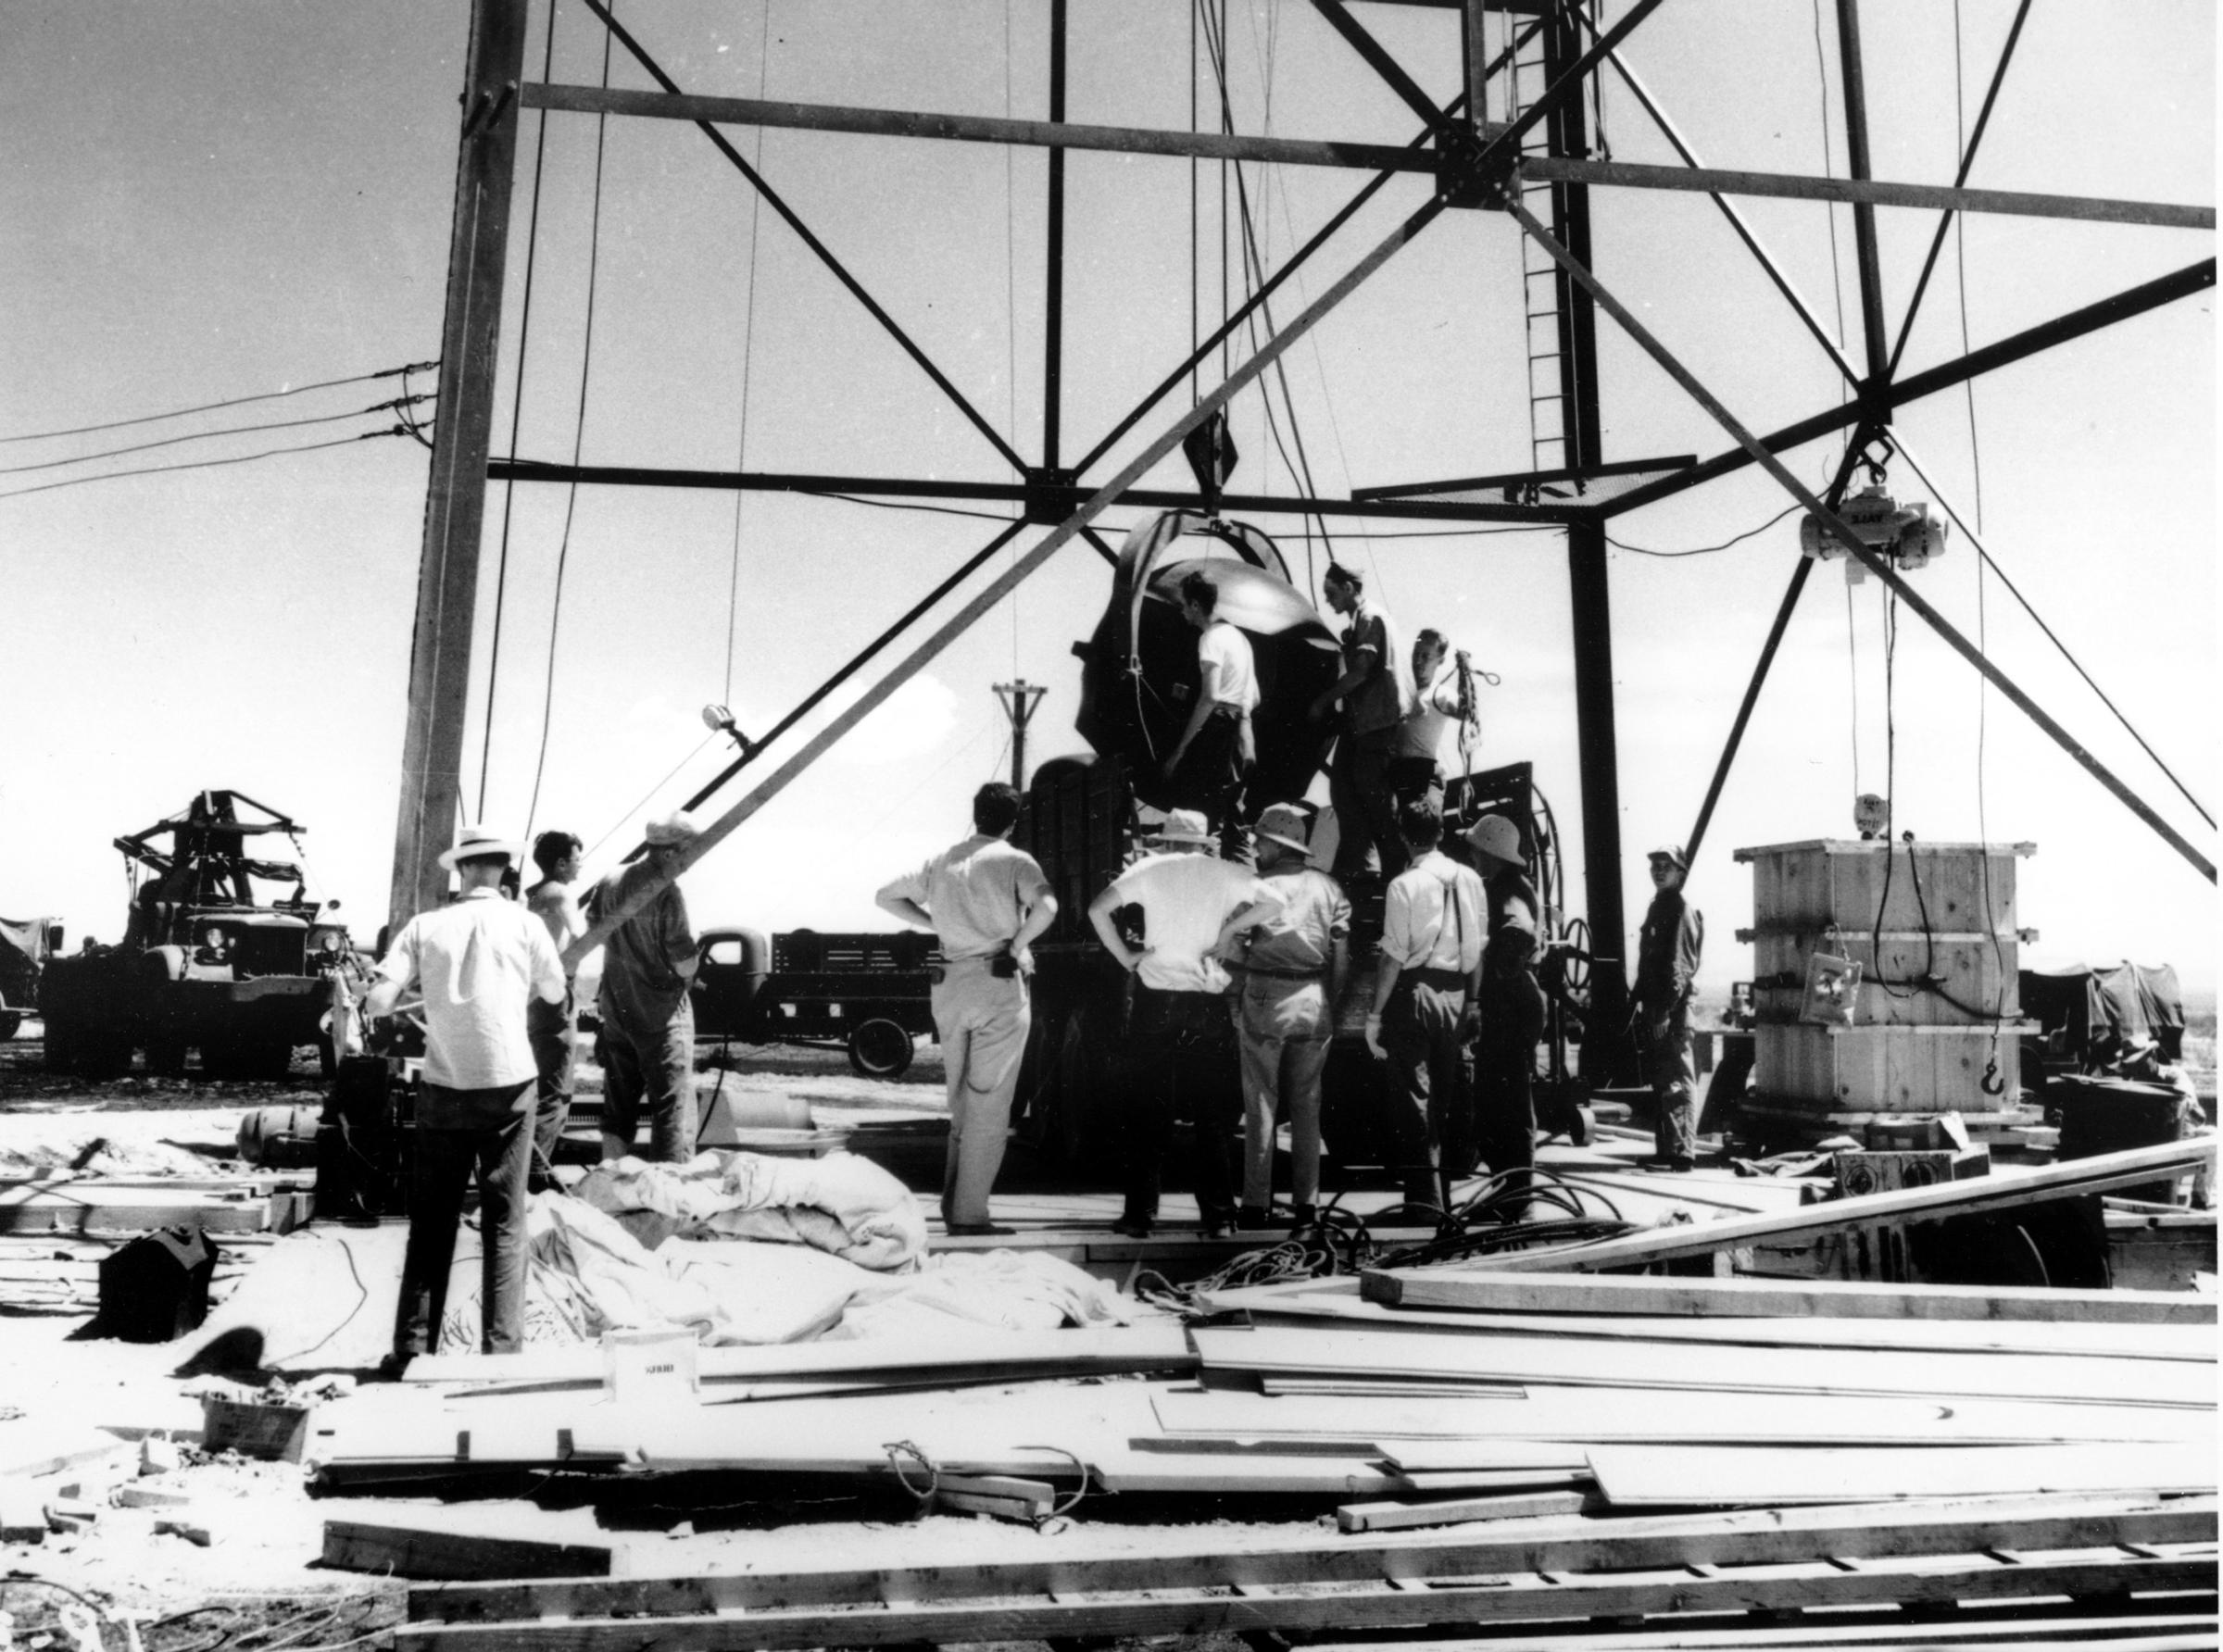 Scientists and workmen rig the world's first atomic bomb to raise it up into a 100-foot tower at the Trinity bomb test site in the desert near Alamagordo, N.M. in July 1945. The first atomic bomb test, known as the Manhattan Project, took place on July 16.